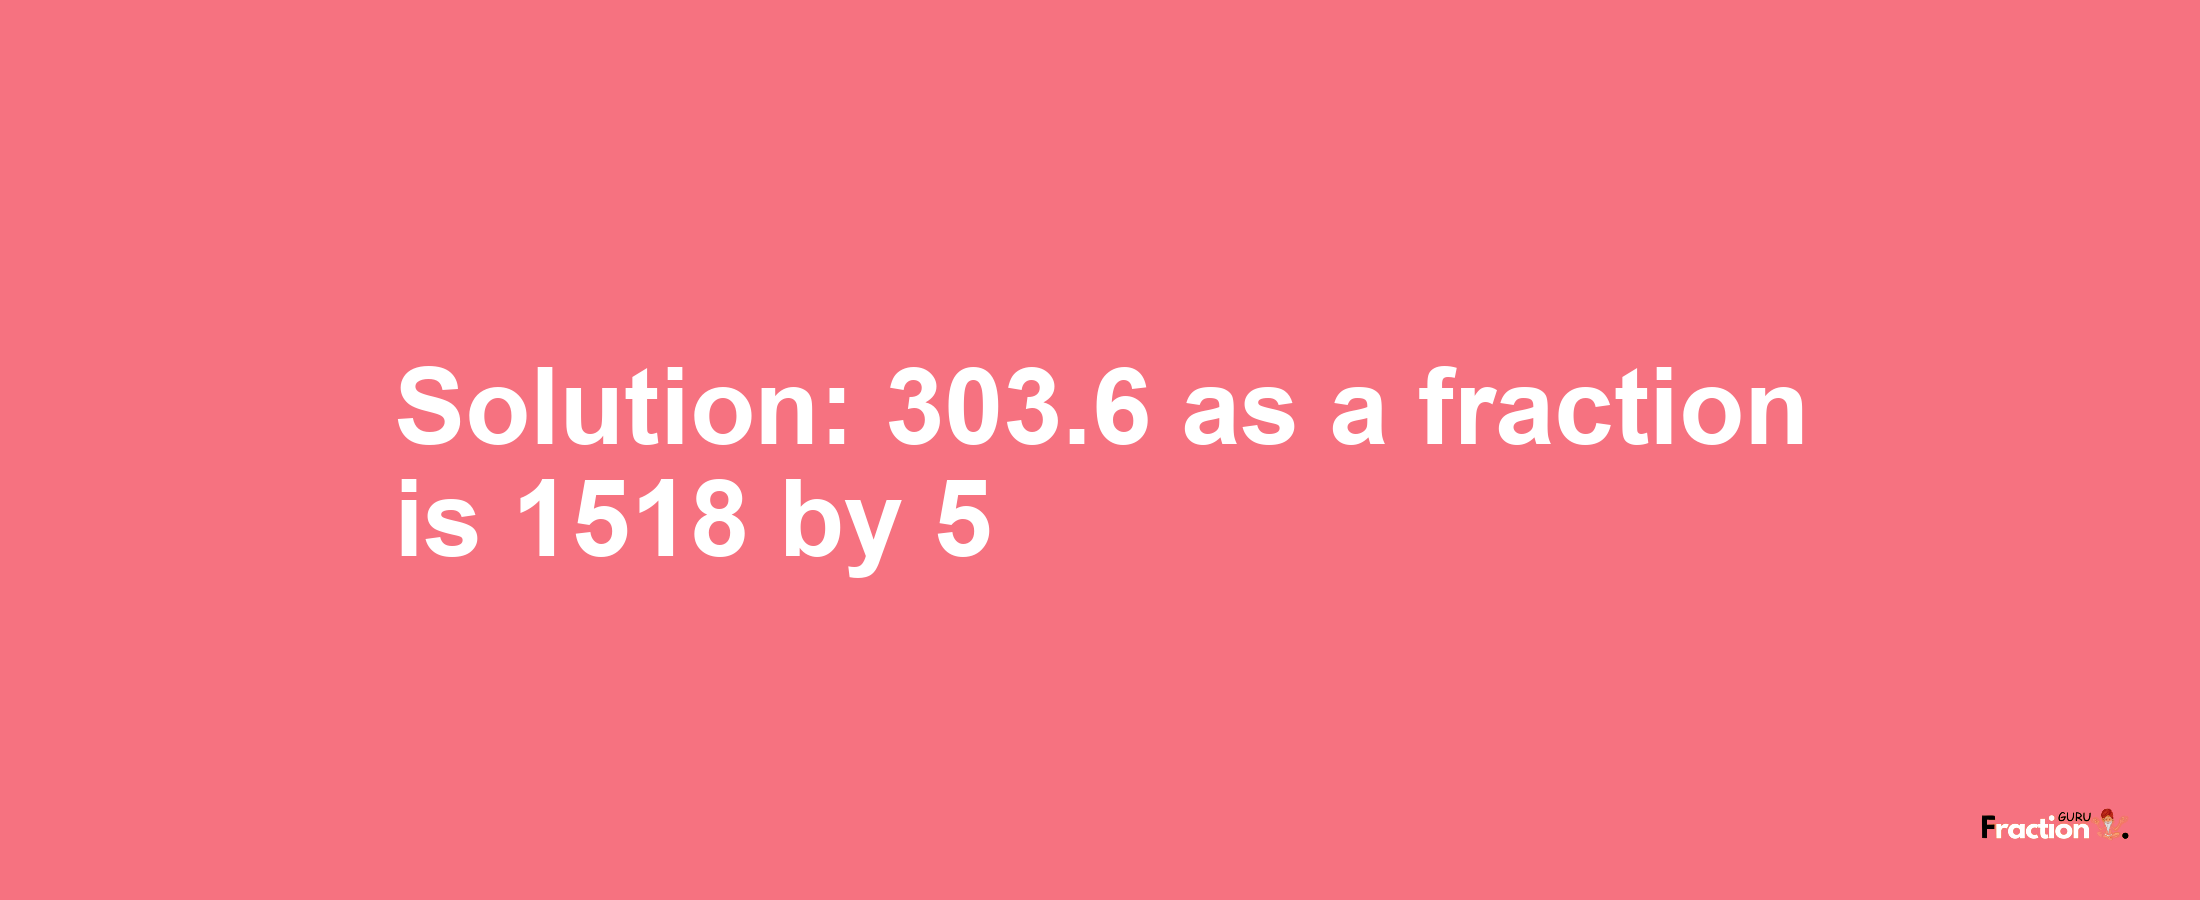 Solution:303.6 as a fraction is 1518/5